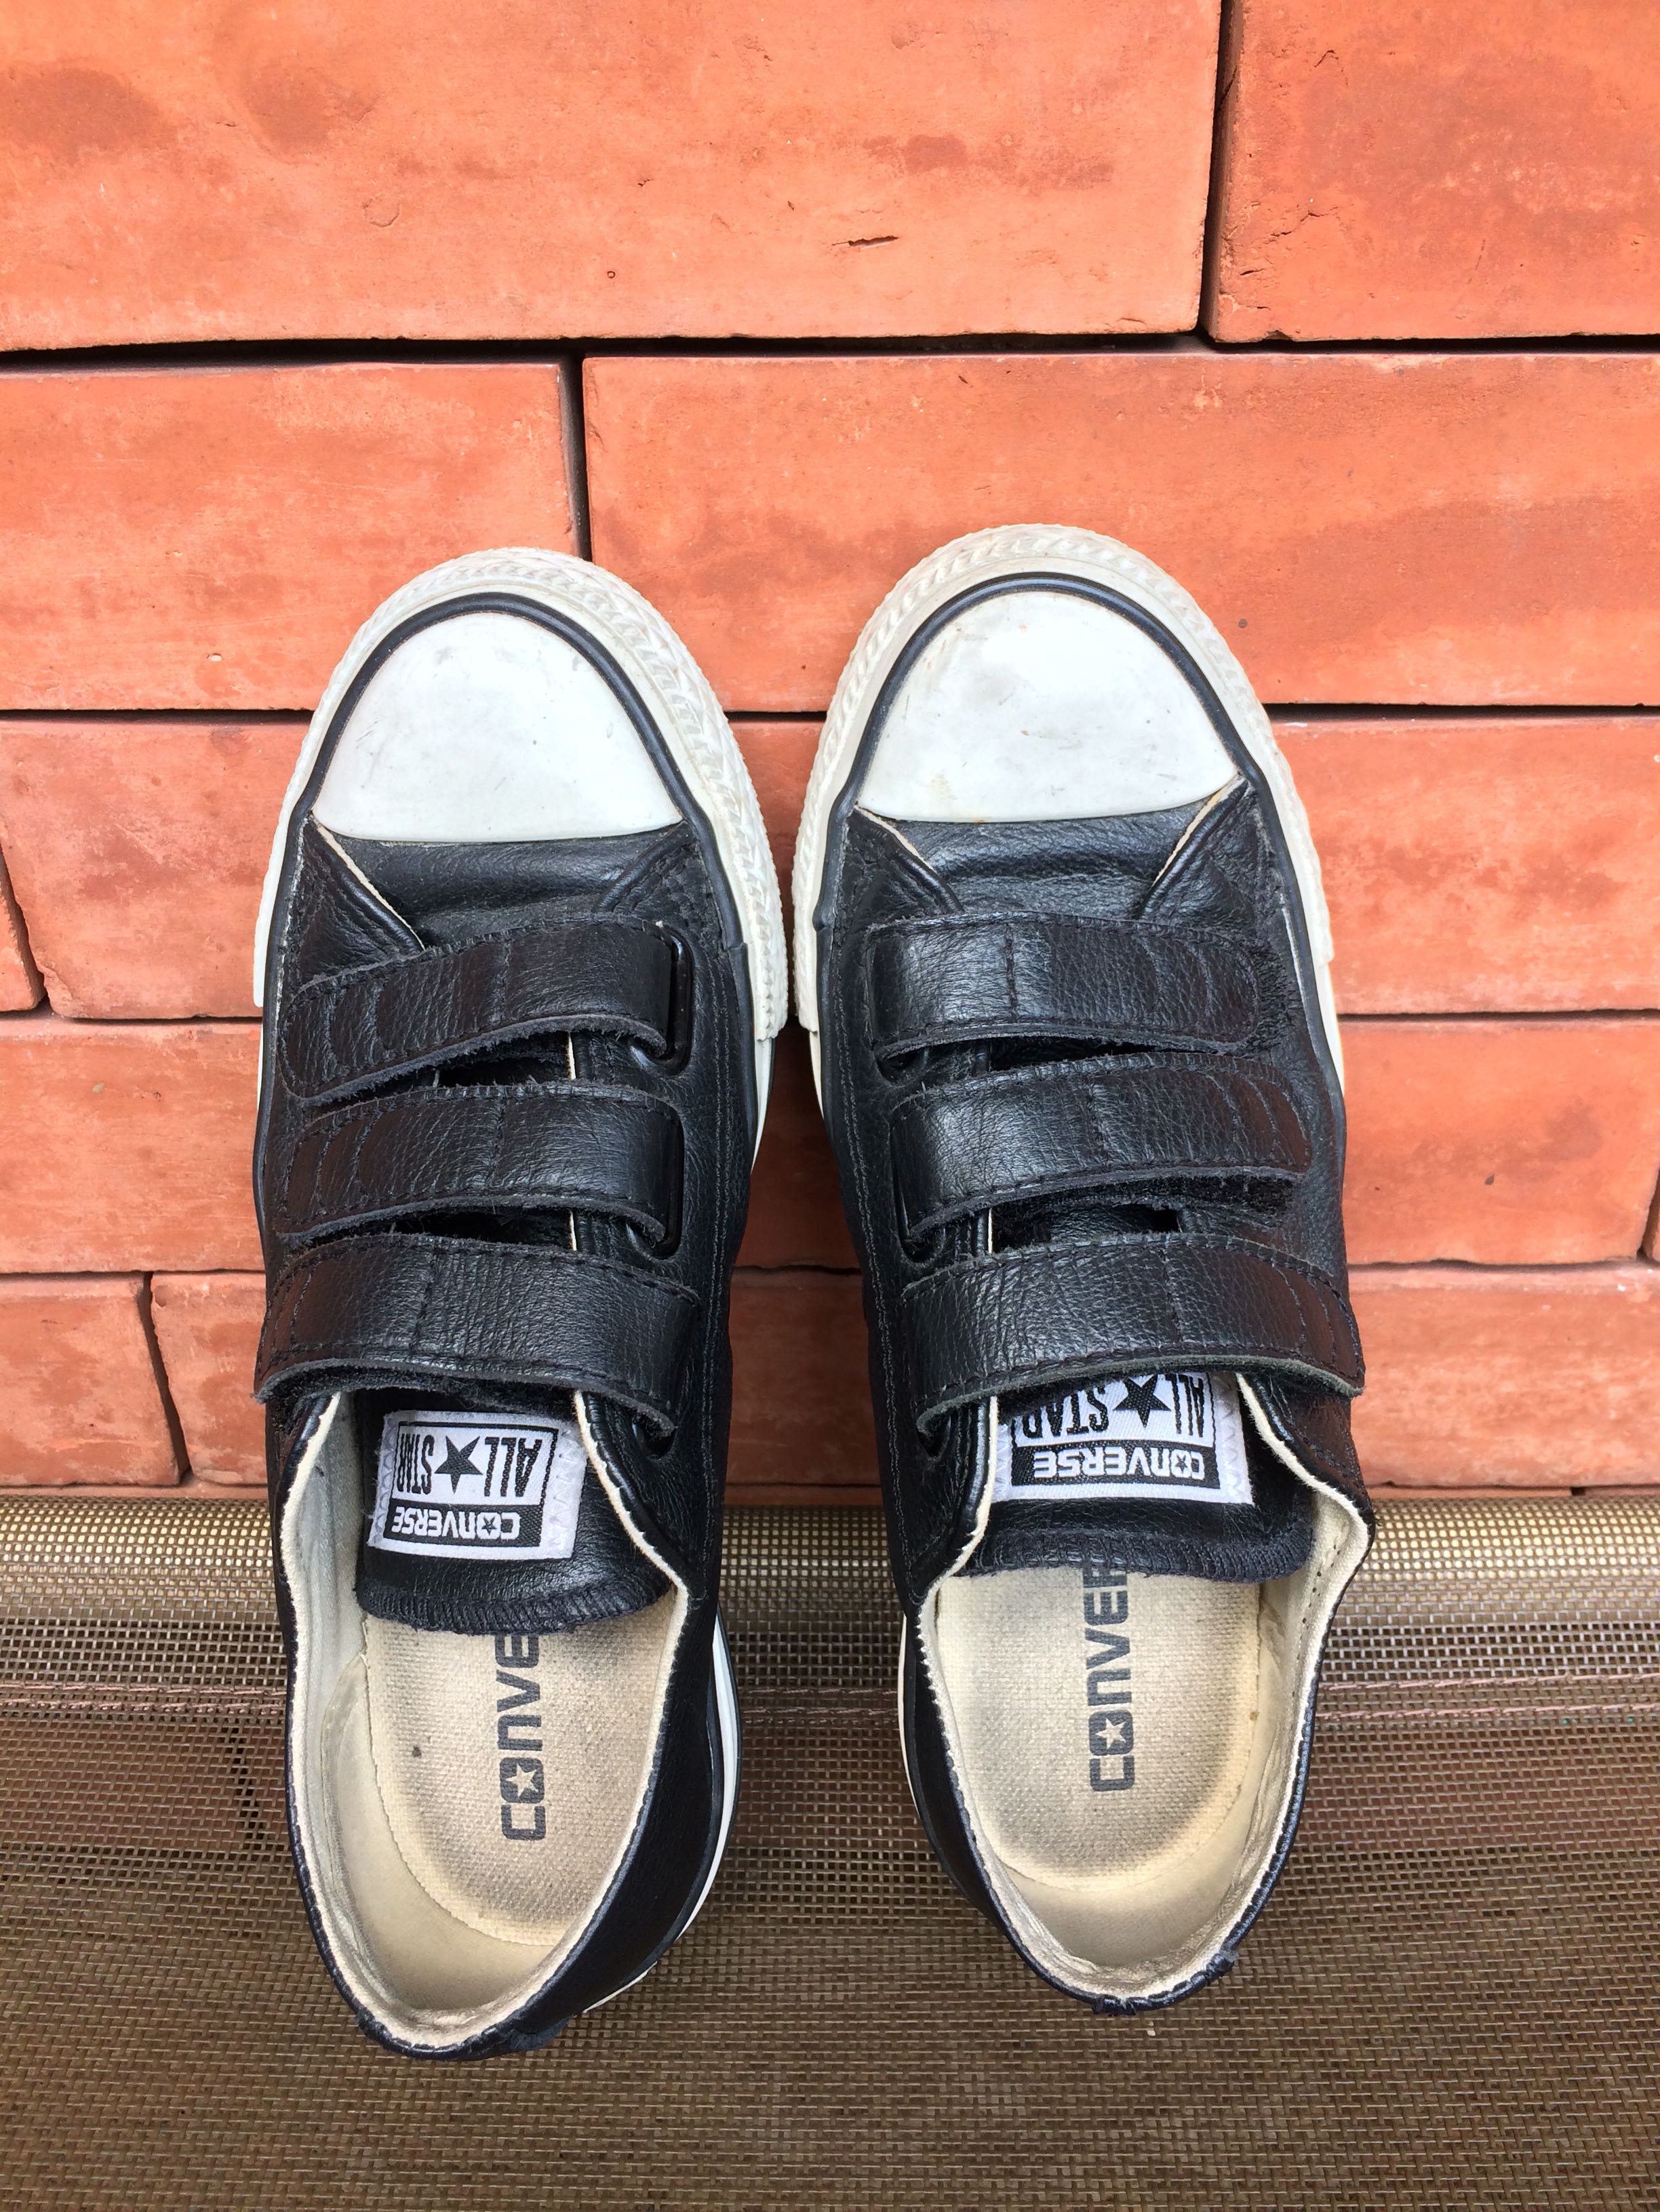 converse leather rubber